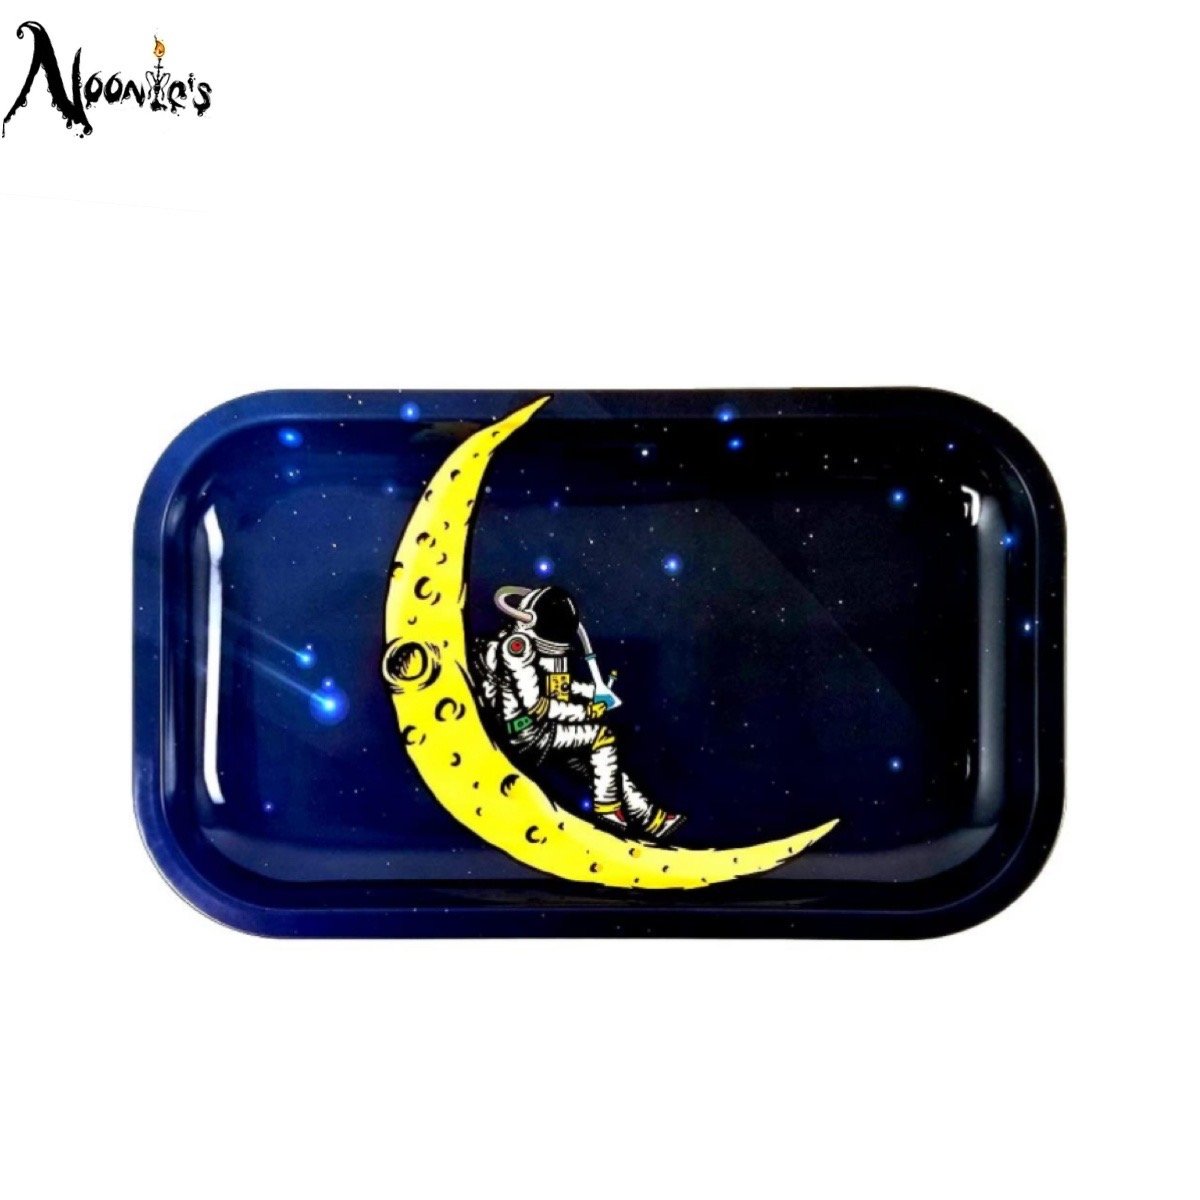 Image of High over the moon rolling tray (named by shesforeignonly)